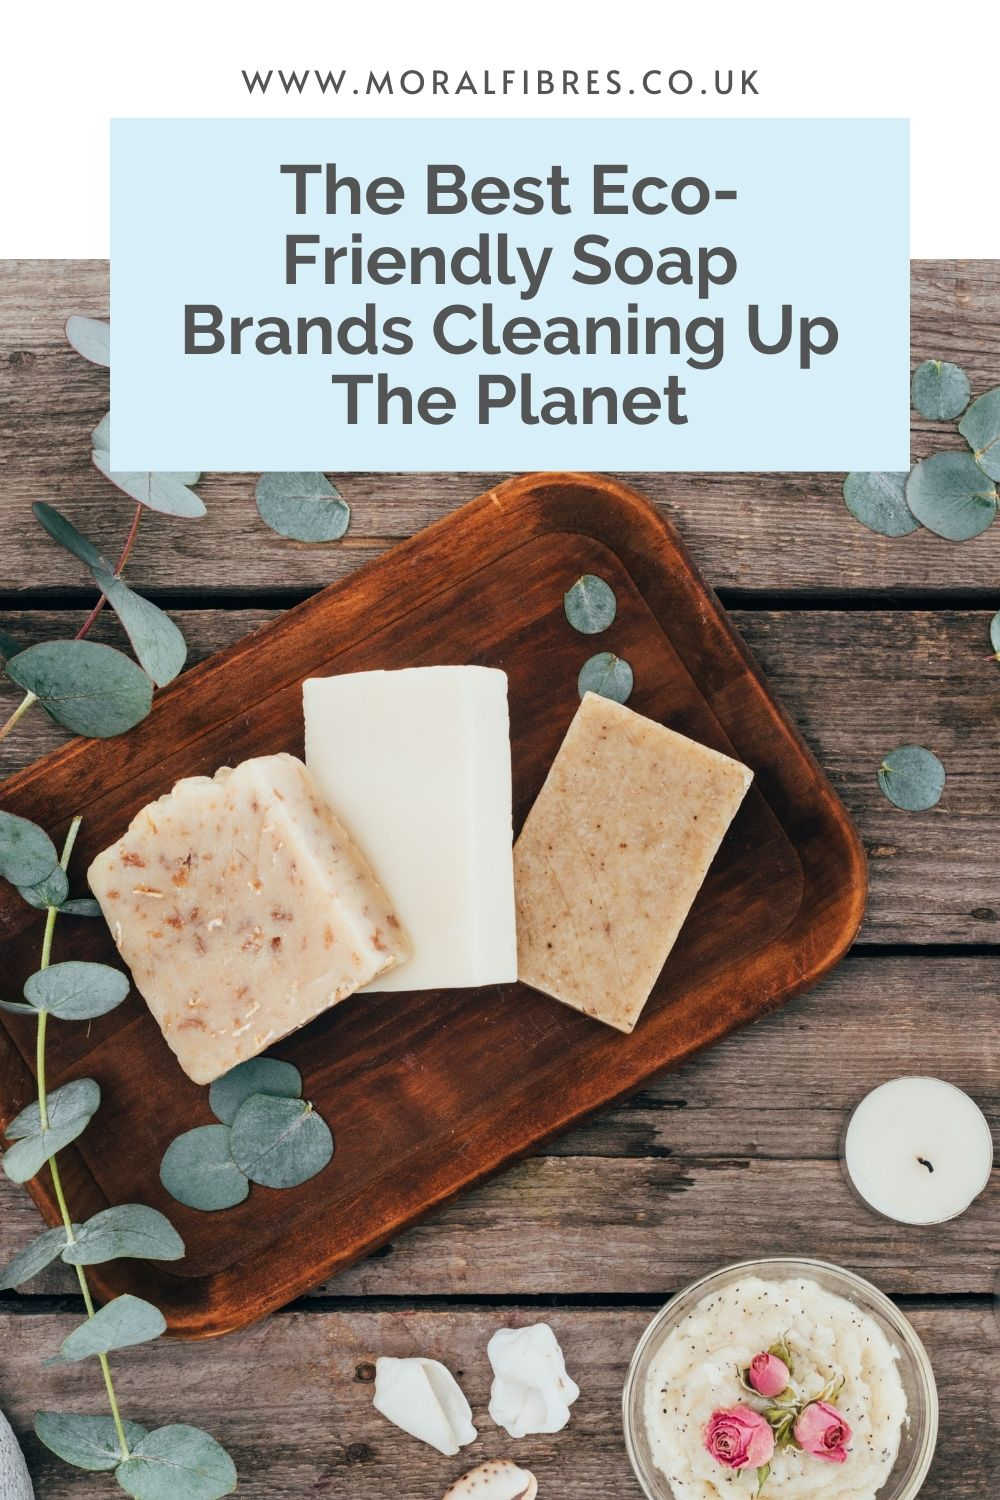 Three bars of soap on a wooden table, with a blue text box that says the best eco-friendly soap brands cleaning up the planet.